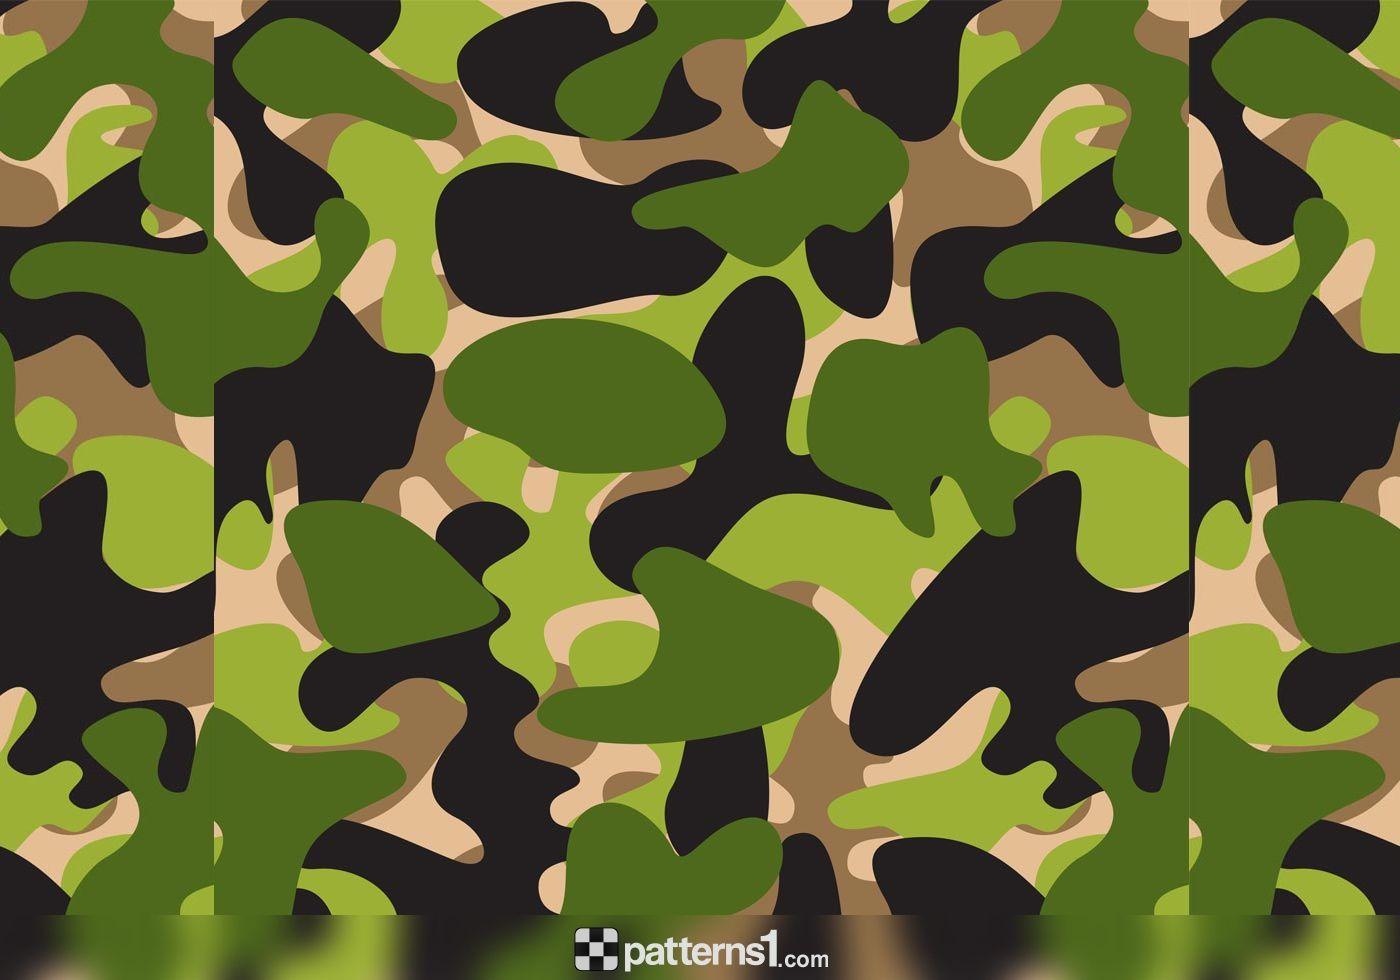 background army vector 7. Background Check All